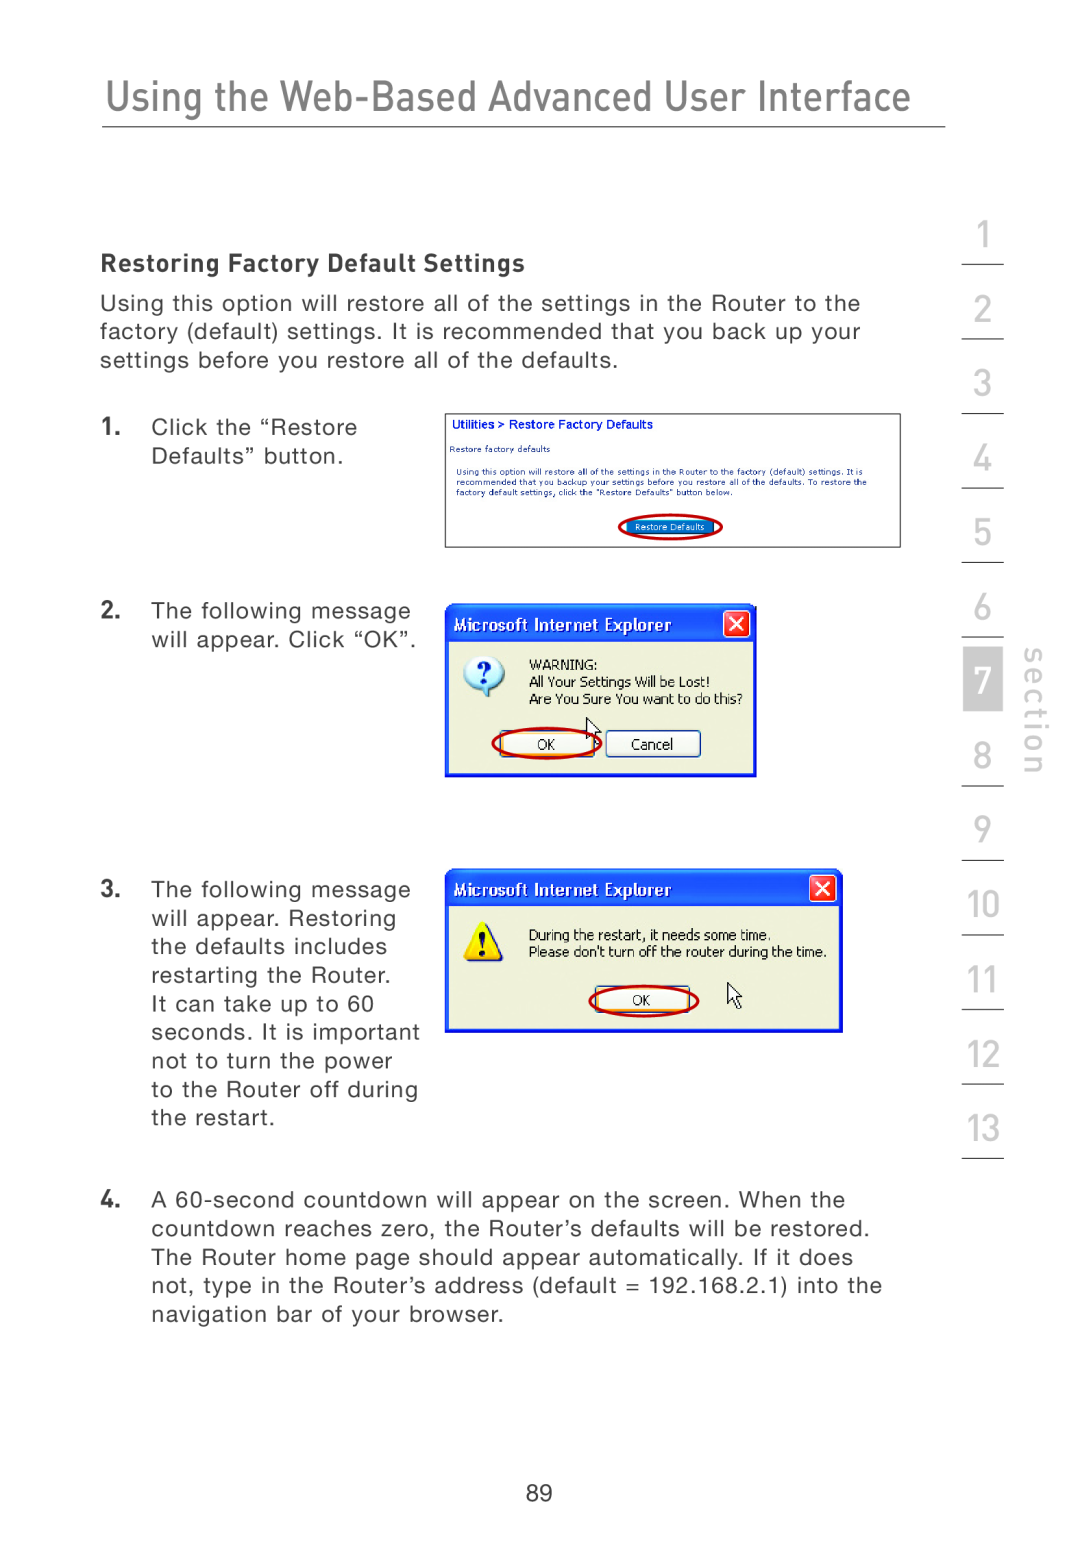 Belkin F5D7231-4P user manual Restoring Factory Default Settings, Using the Web-Based Advanced User Interface, section 